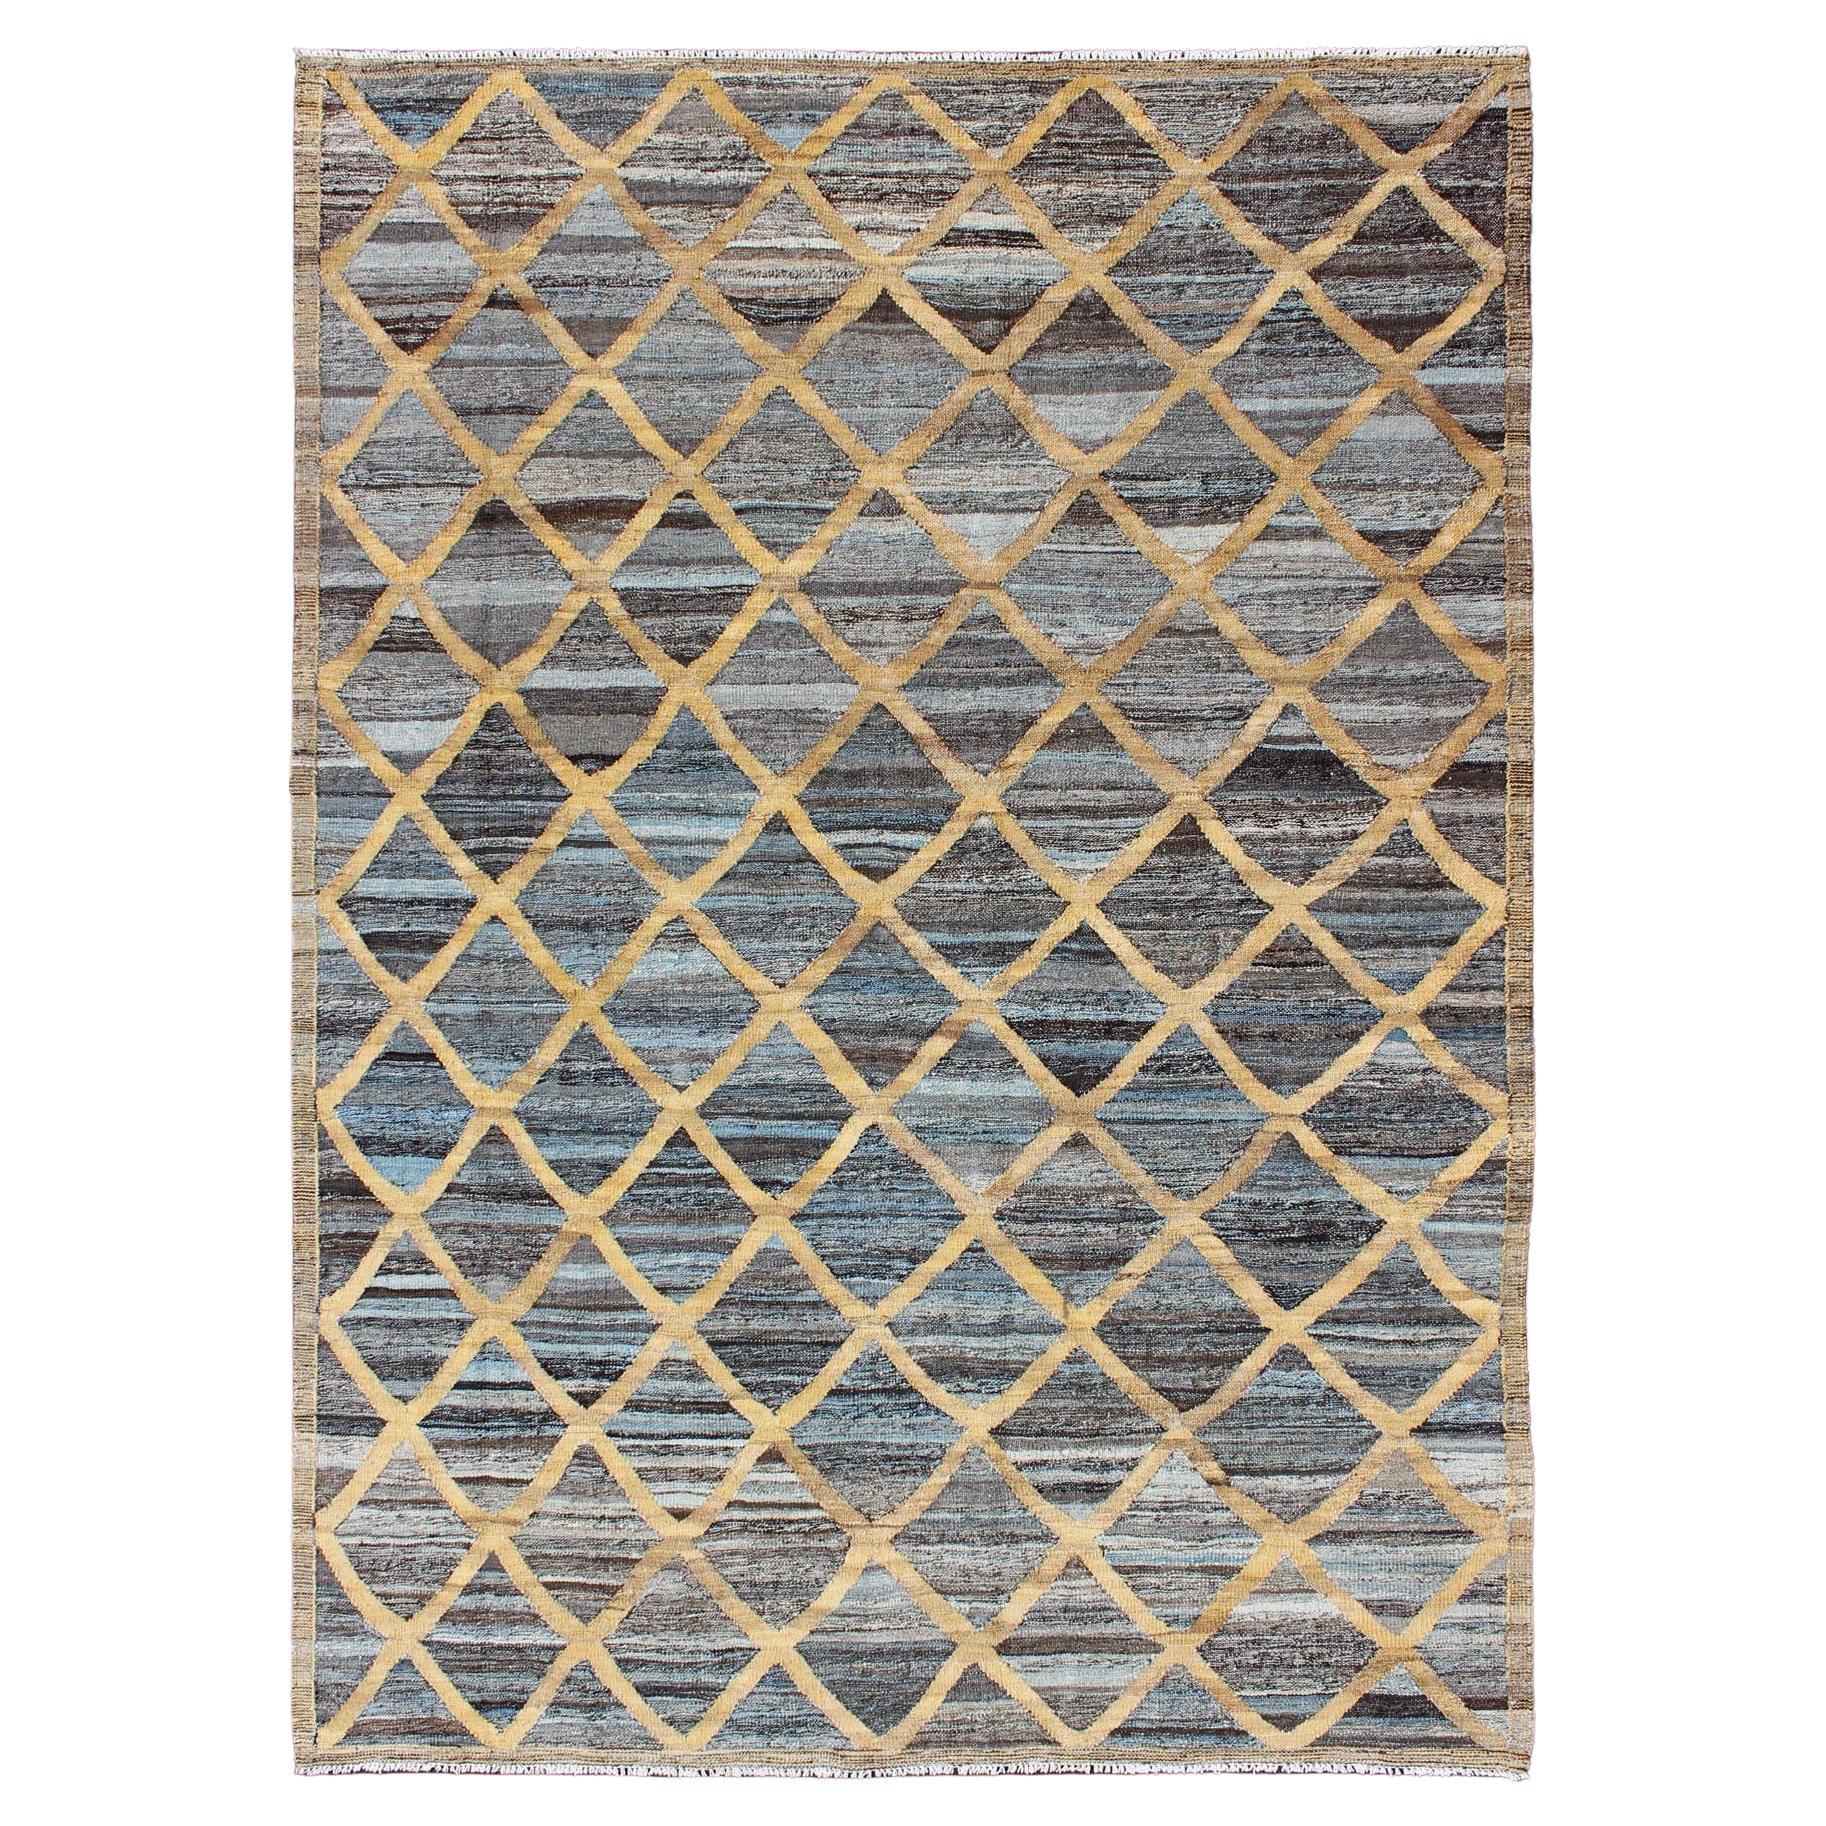 Keivan Woven Arts Flat-Weave Kilim in Diamond Gold Design With Blue and Charcoal